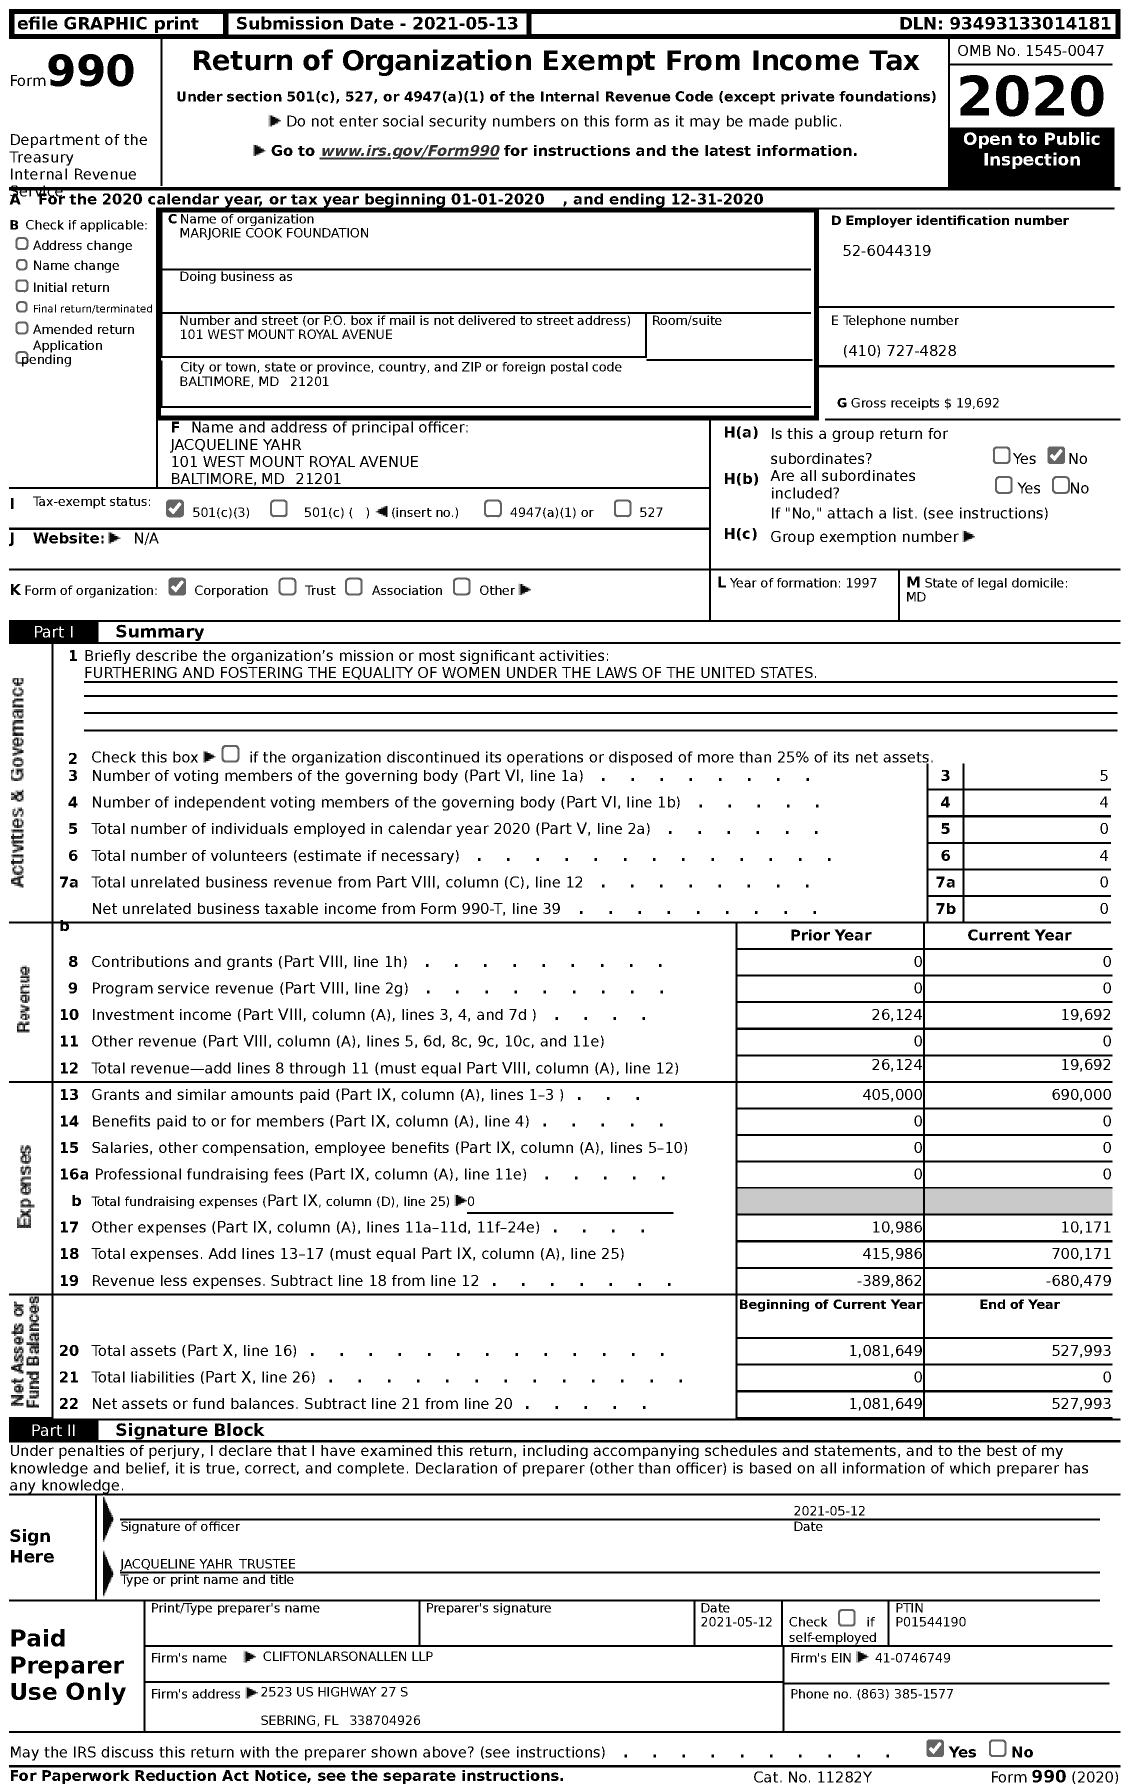 Image of first page of 2020 Form 990 for Marjorie Cook Foundation